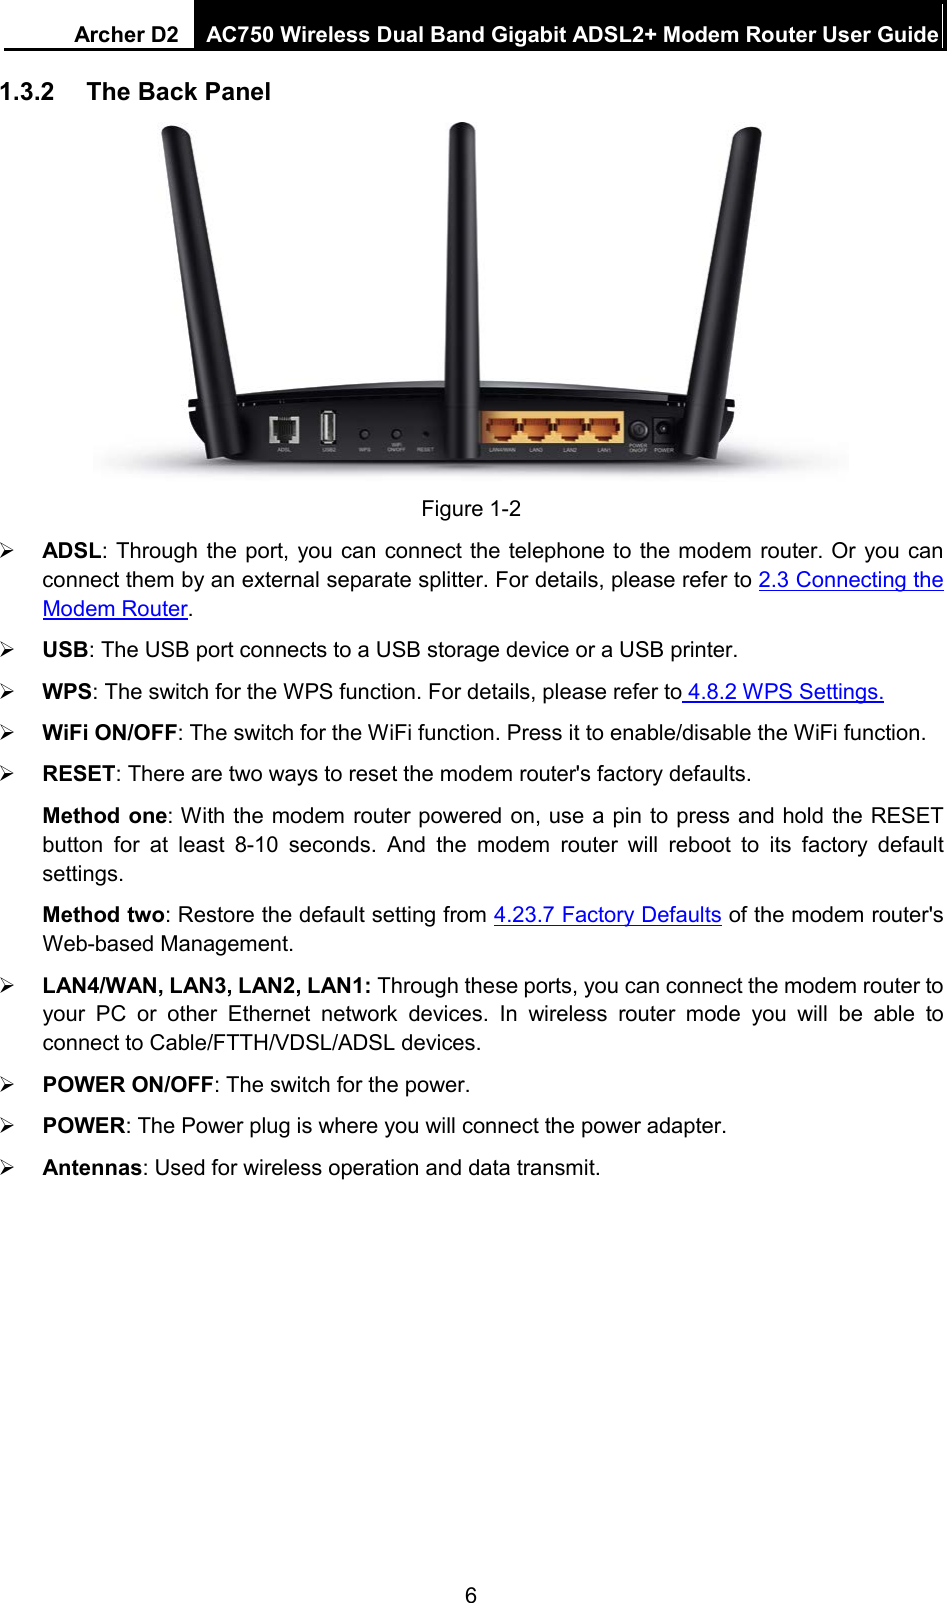 Archer D2 AC750 Wireless Dual Band Gigabit ADSL2+ Modem Router User Guide  1.3.2 The Back Panel  Figure 1-2  ADSL: Through the port, you can connect the telephone to the modem router. Or you can connect them by an external separate splitter. For details, please refer to 2.3 Connecting the Modem Router.    USB: The USB port connects to a USB storage device or a USB printer.  WPS: The switch for the WPS function. For details, please refer to 4.8.2 WPS Settings.  WiFi ON/OFF: The switch for the WiFi function. Press it to enable/disable the WiFi function.  RESET: There are two ways to reset the modem router&apos;s factory defaults.   Method one: With the modem router powered on, use a pin to press and hold the RESET button for at least 8-10 seconds. And the modem router will reboot to its factory default settings. Method two: Restore the default setting from 4.23.7 Factory Defaults of the modem router&apos;s Web-based Management.  LAN4/WAN, LAN3, LAN2, LAN1: Through these ports, you can connect the modem router to your PC or other Ethernet network devices. In wireless router mode  you will be able to connect to Cable/FTTH/VDSL/ADSL devices.  POWER ON/OFF: The switch for the power.  POWER: The Power plug is where you will connect the power adapter.  Antennas: Used for wireless operation and data transmit. 6 